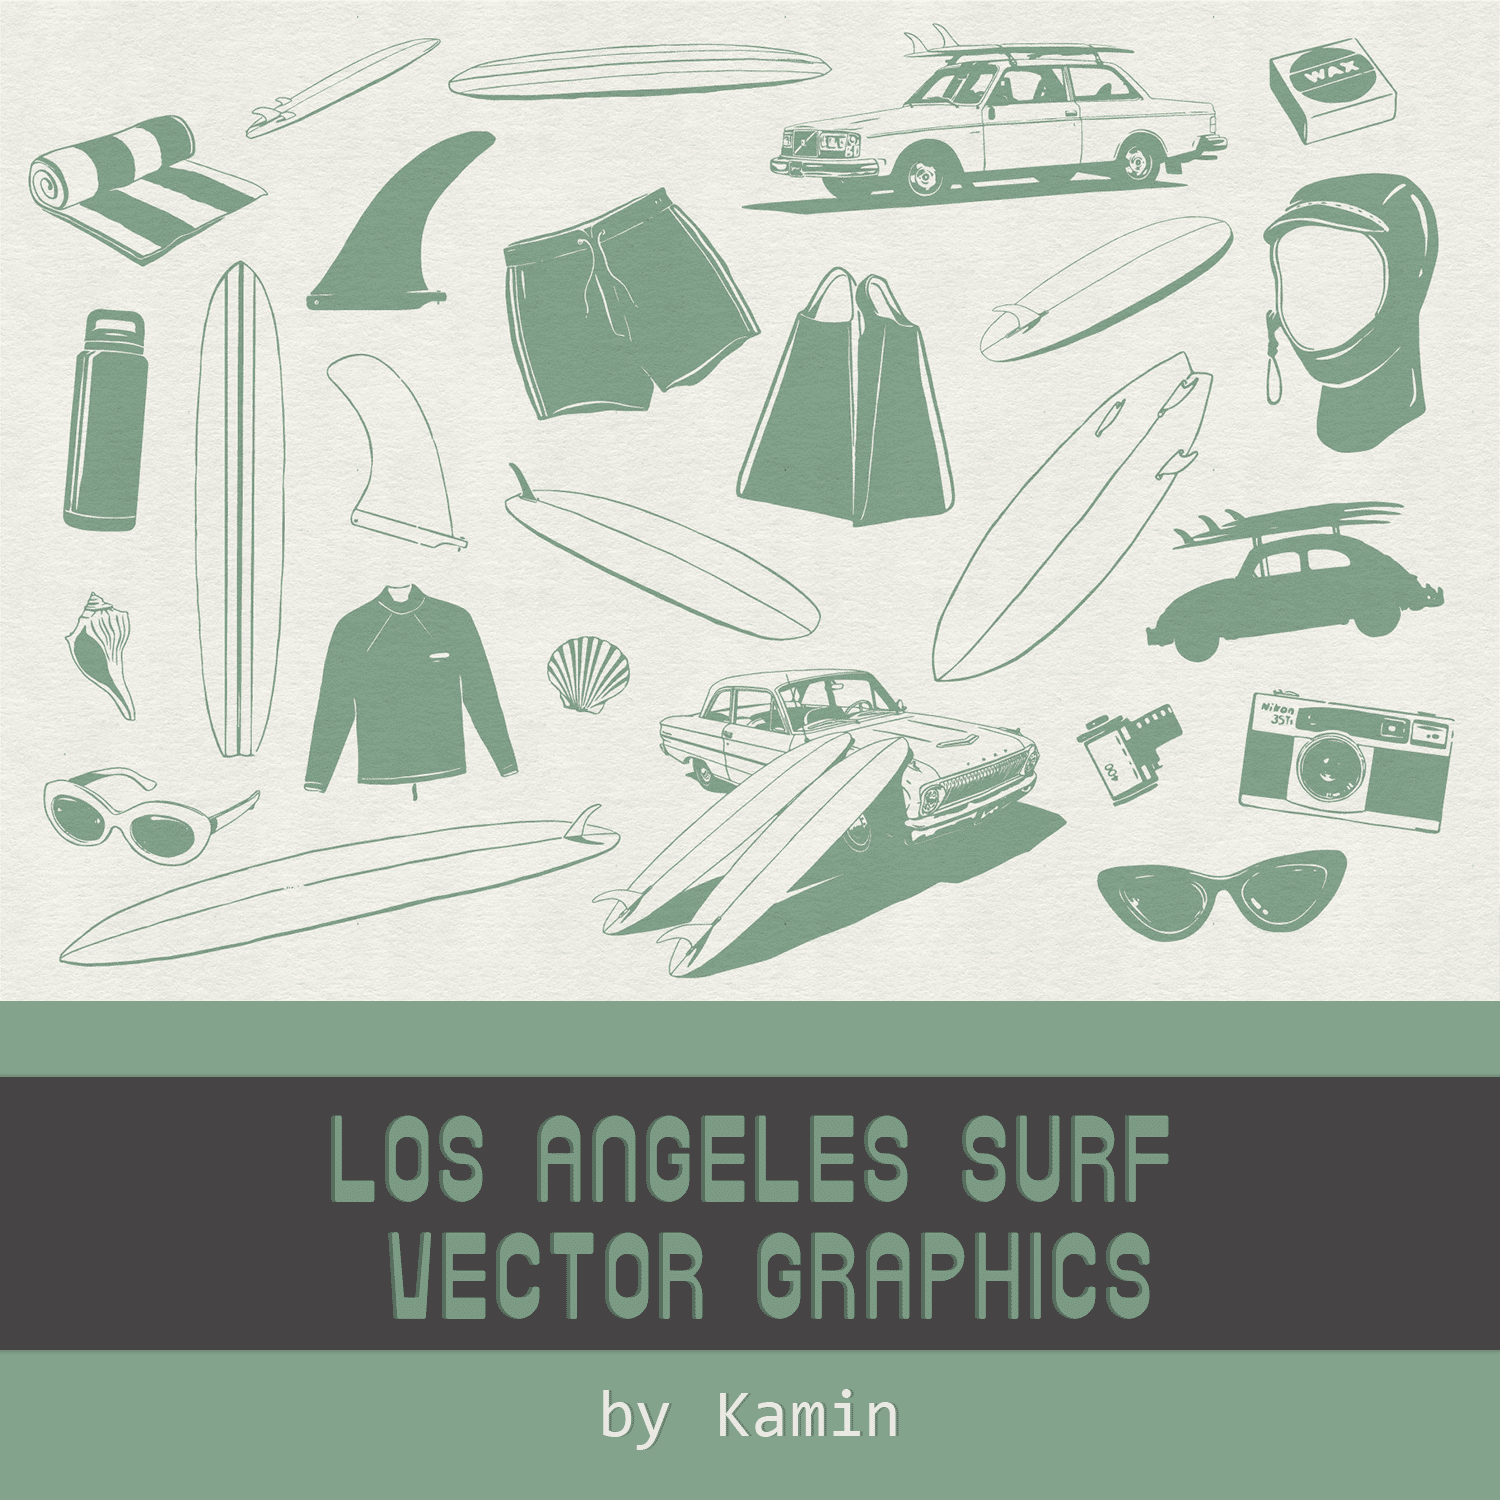 Los Angeles Surf Vector Graphics cover.